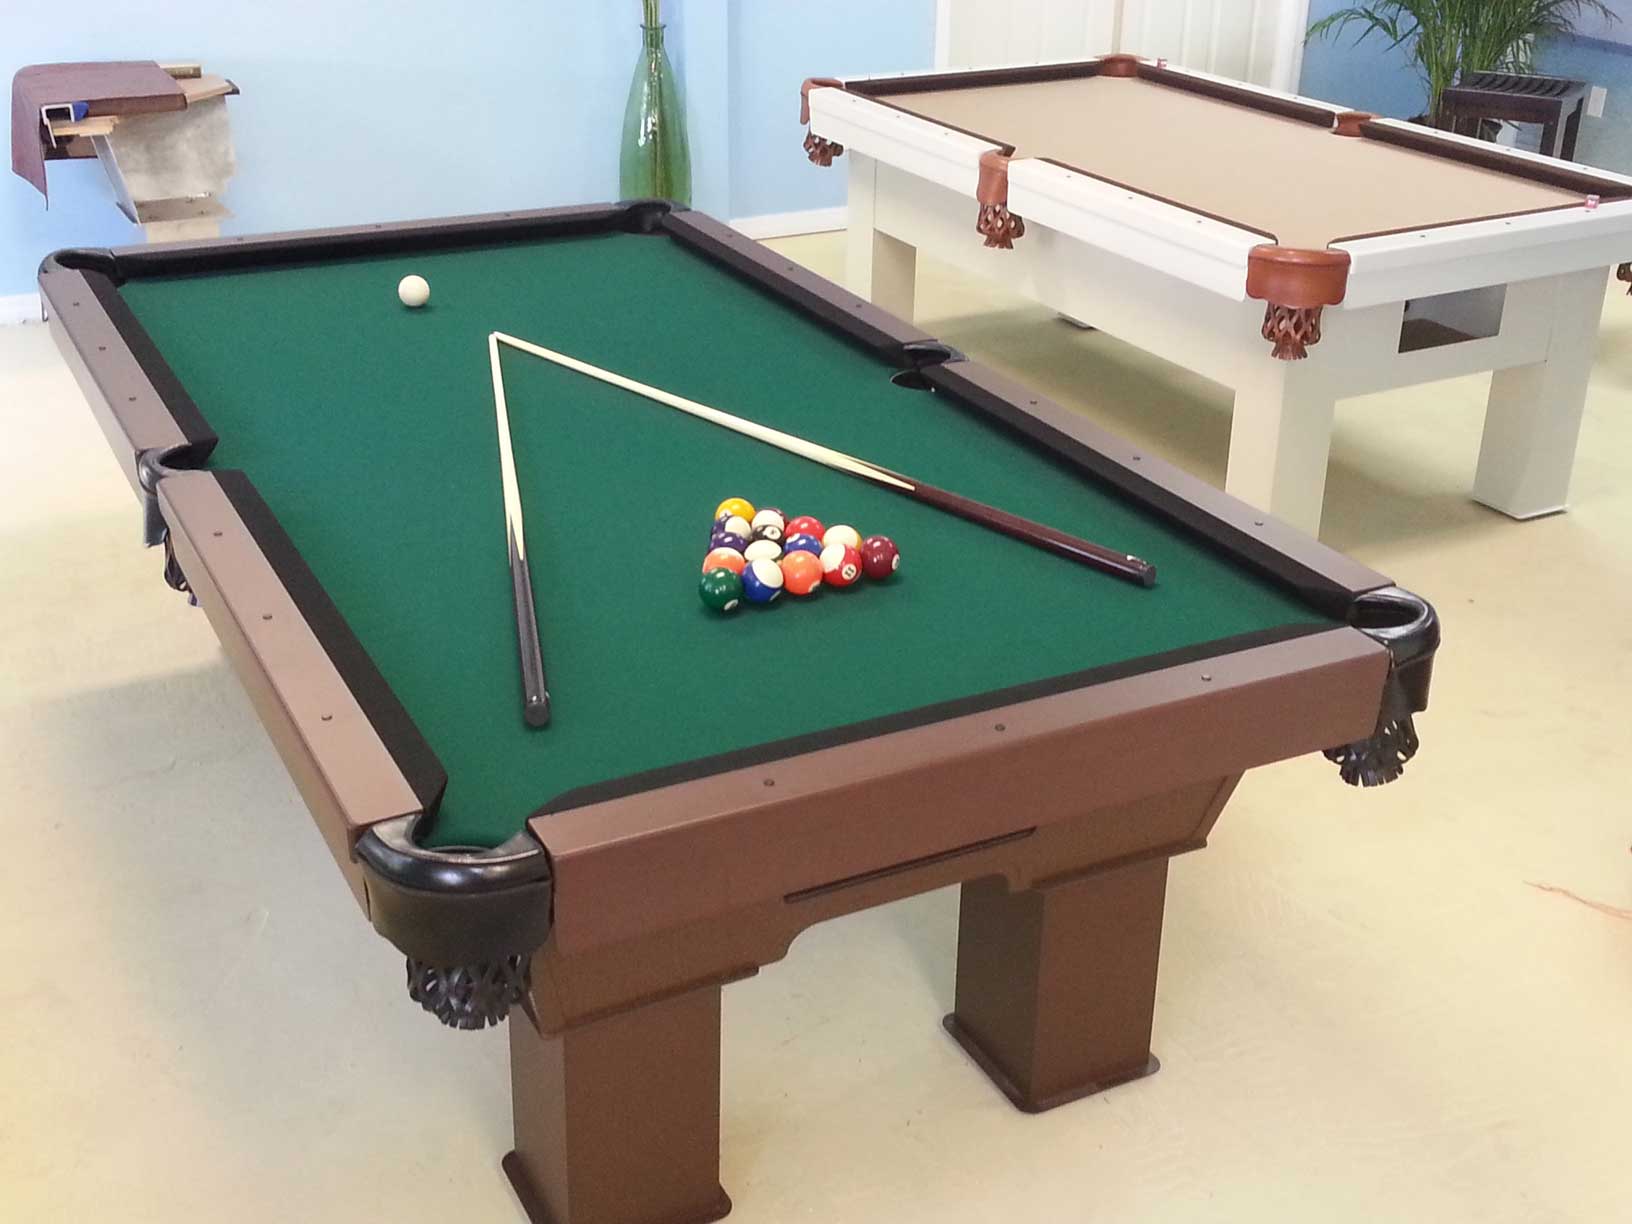 Caesar outdoor pool table in R&R Outdoors All Weather Billiards showroom in Naples, Florida